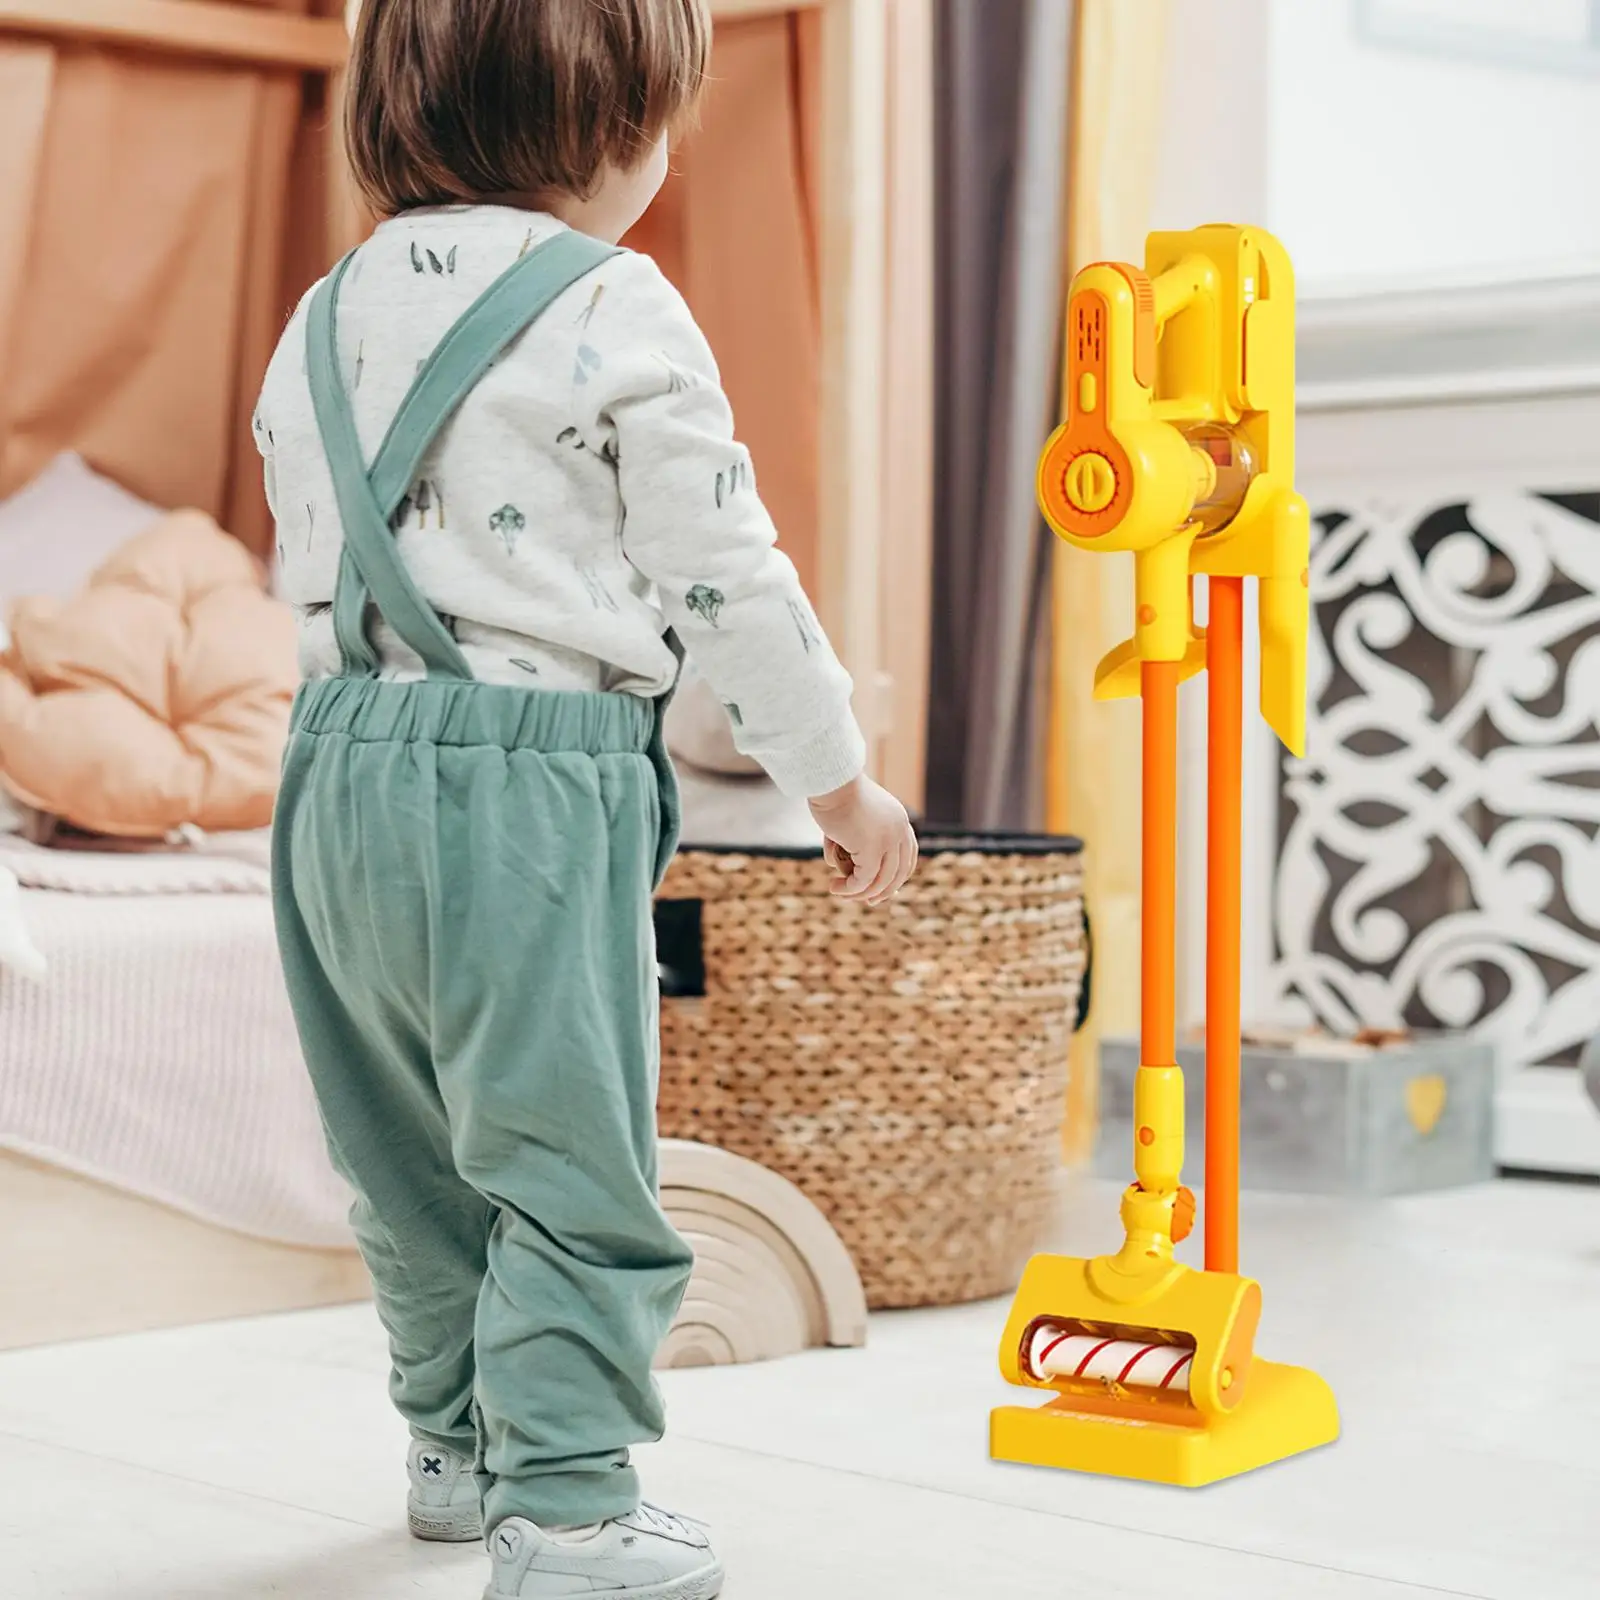 Kids Cleaning Toy Cleaner Kids Vacuum Cleaner toy Dust Catcher Toy house Cleaning Toy for Girls Kids Birthday Gift